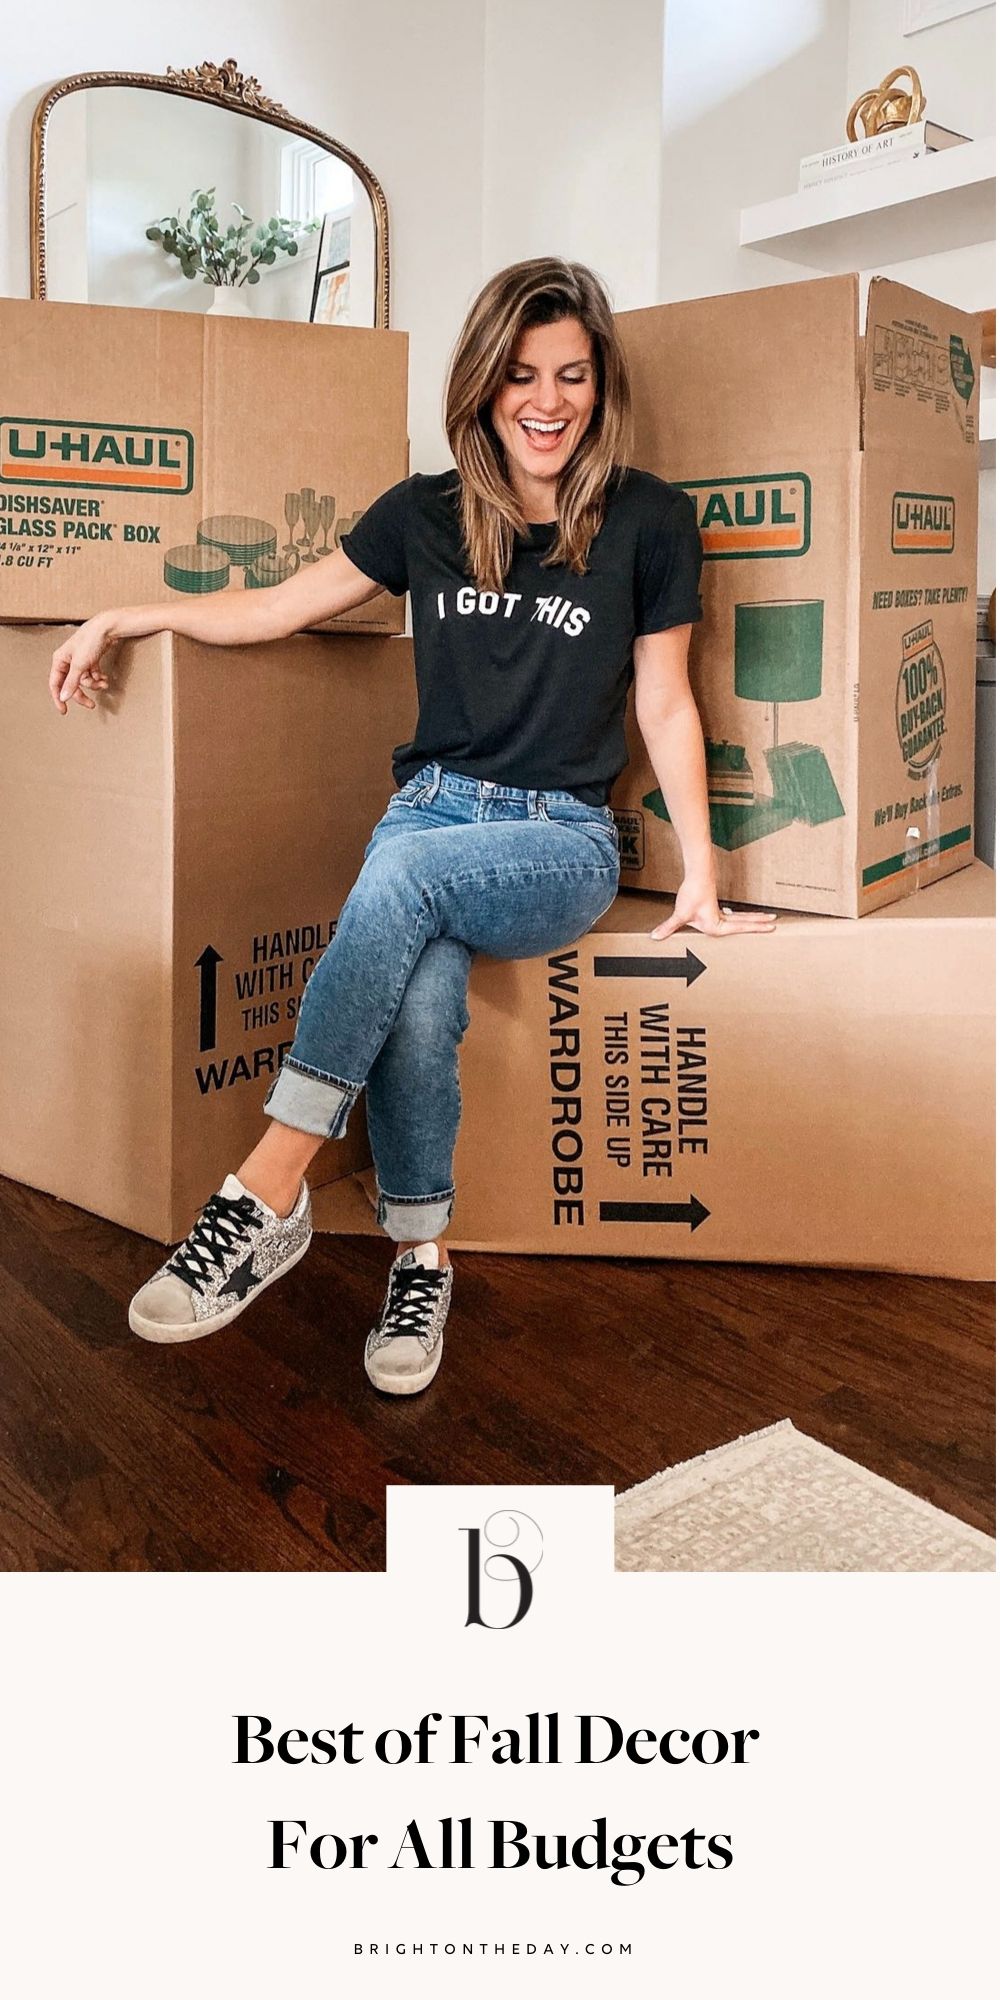 brighton keller sharing fall decor tips wearing i got this tee and medium wash jeans and graphic tee and golden goose sneakers